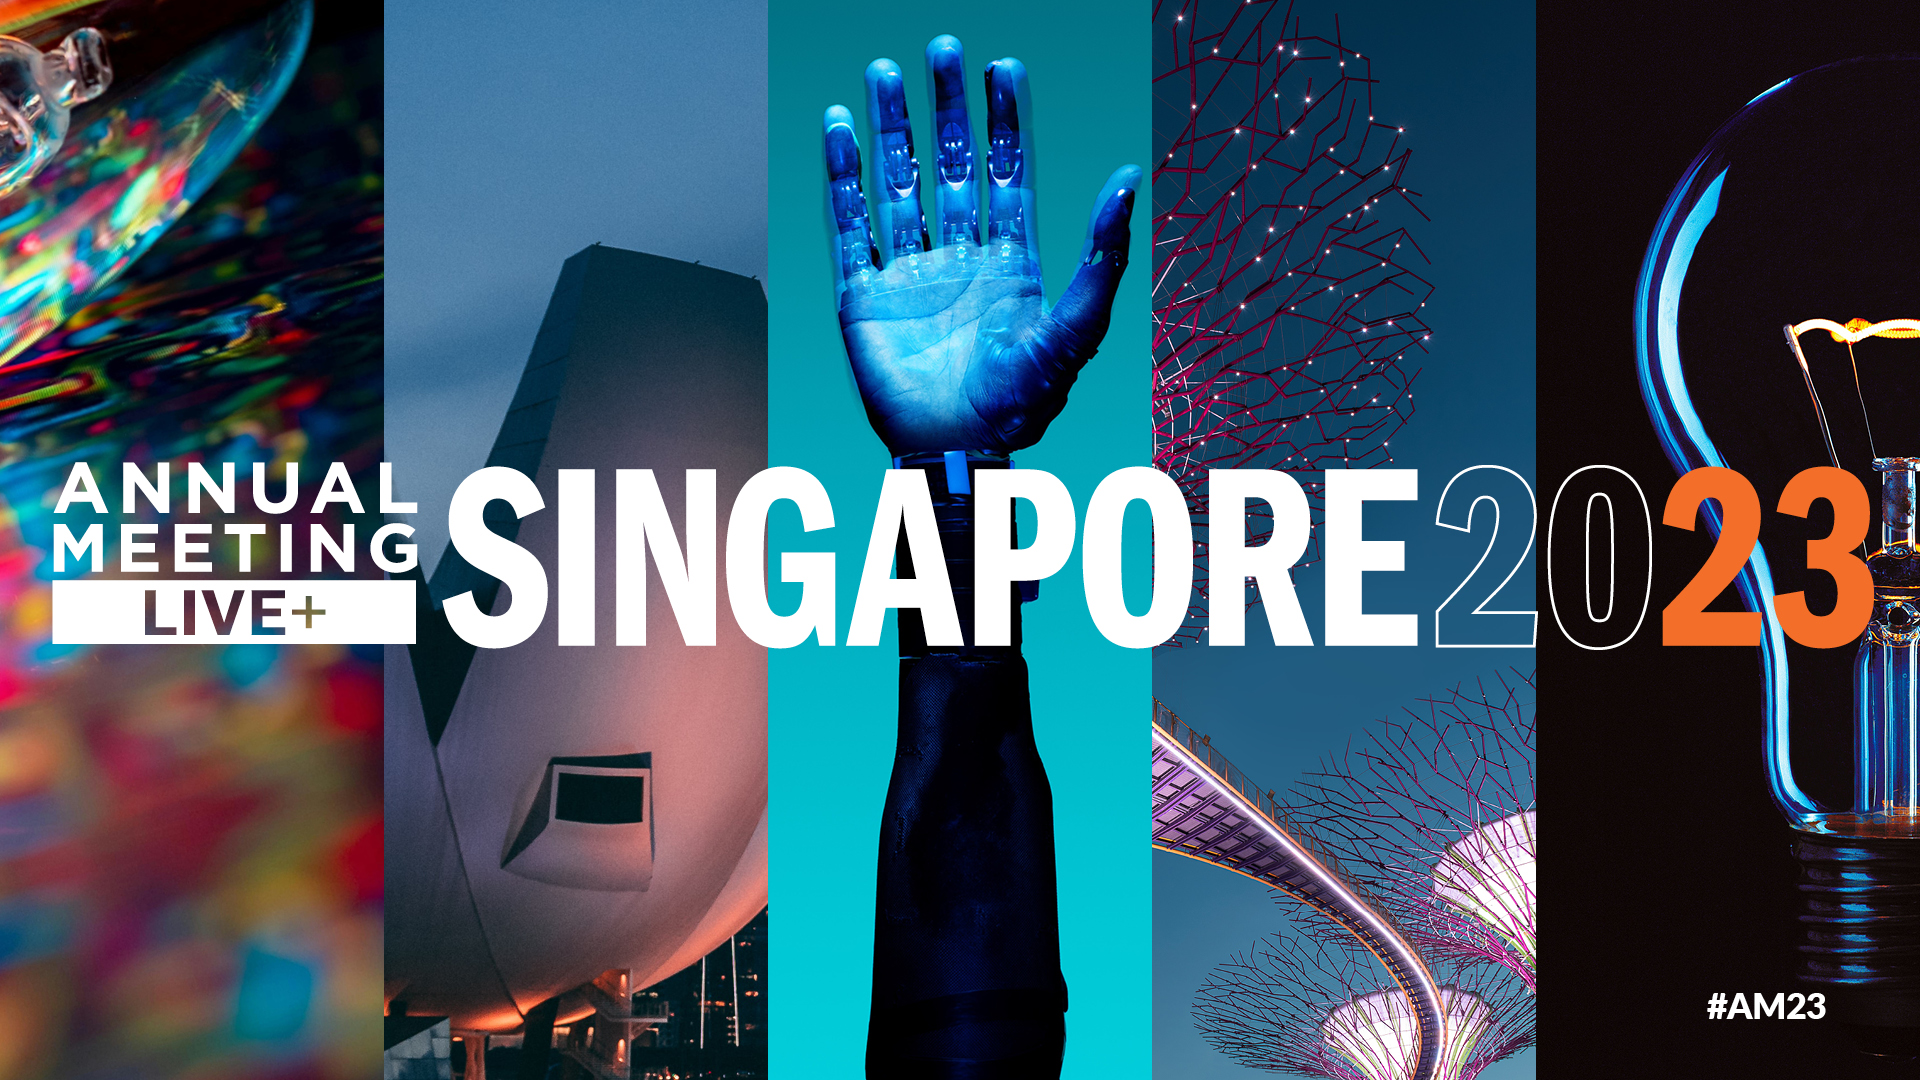 2023 Annual Meeting Live+ Singapore